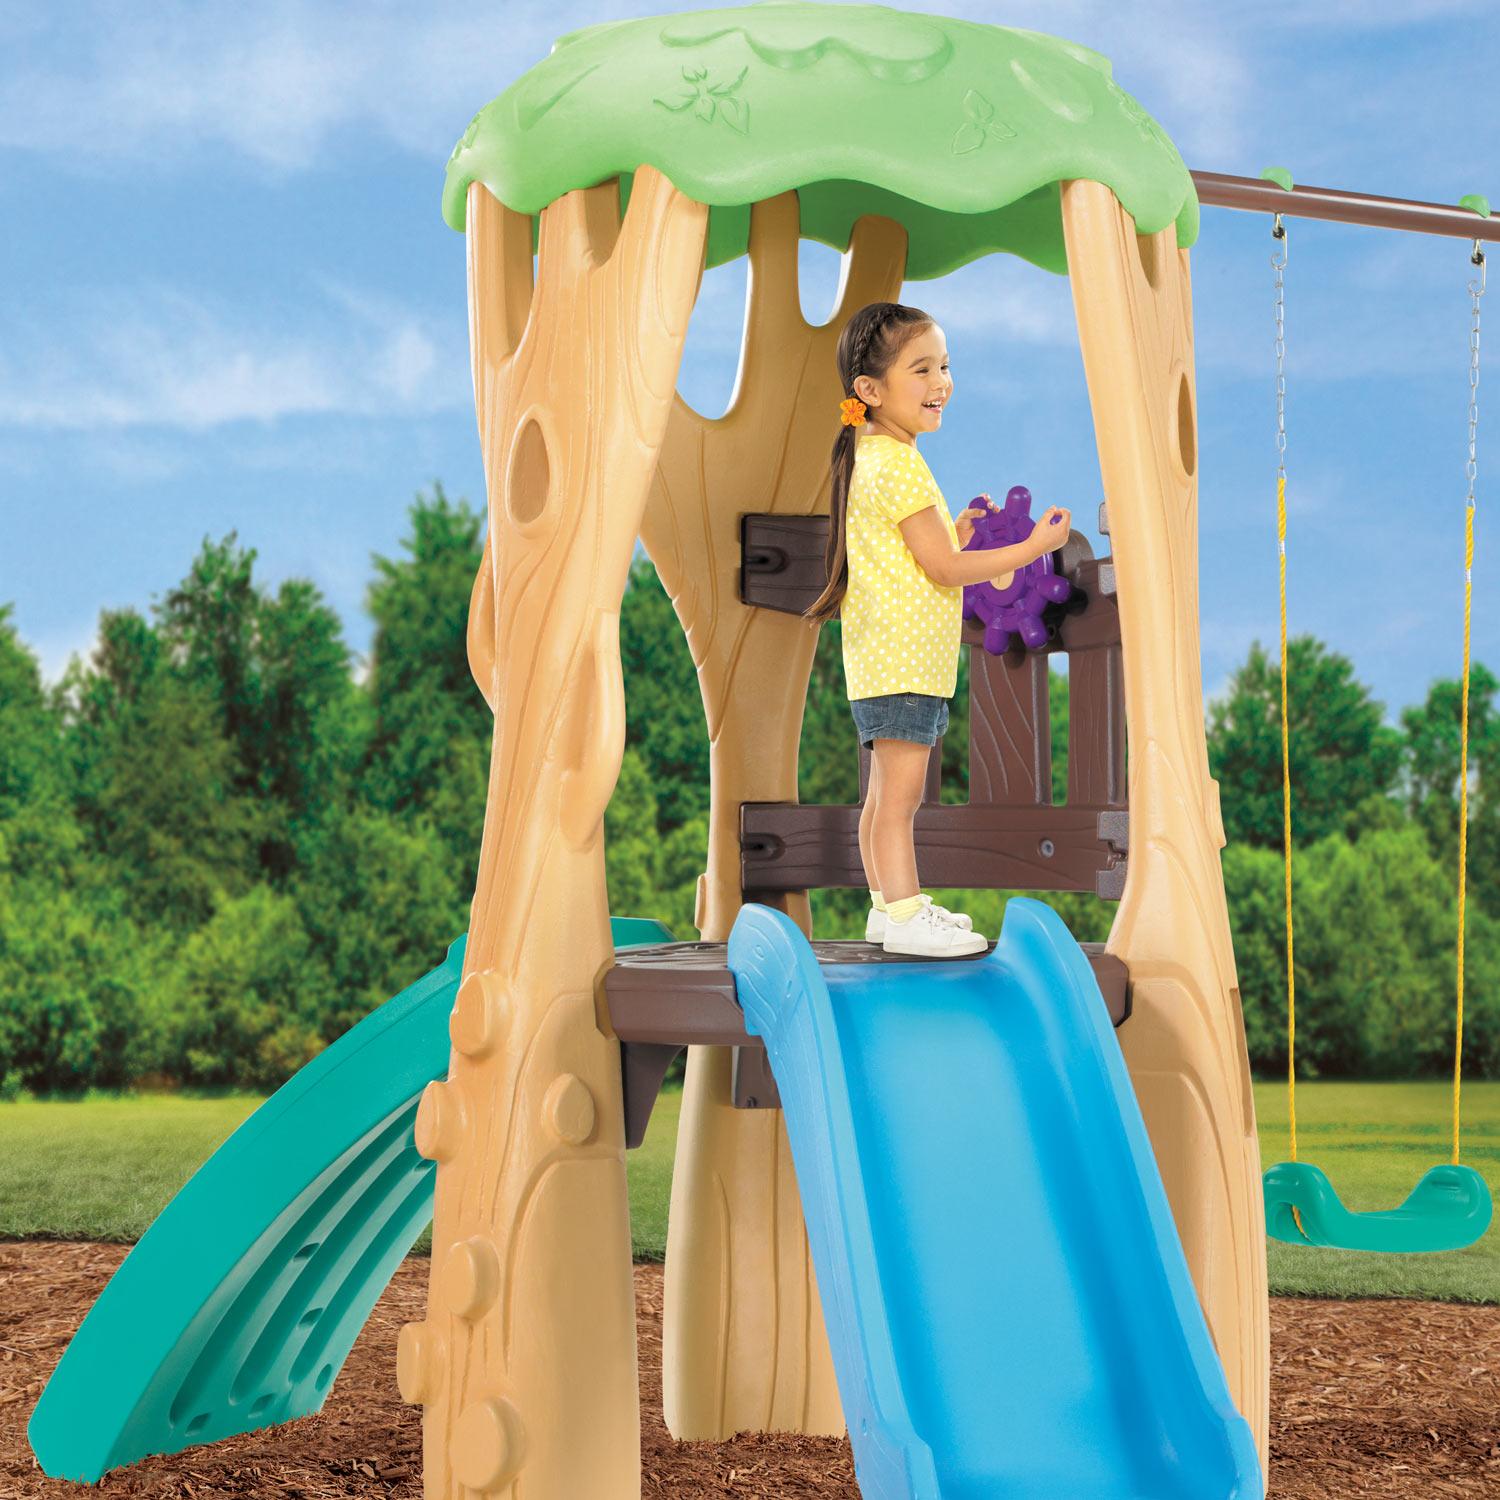 Little Tikes Tree House Plastic Swing Set for 3 - 8 Year Old's - image 4 of 6